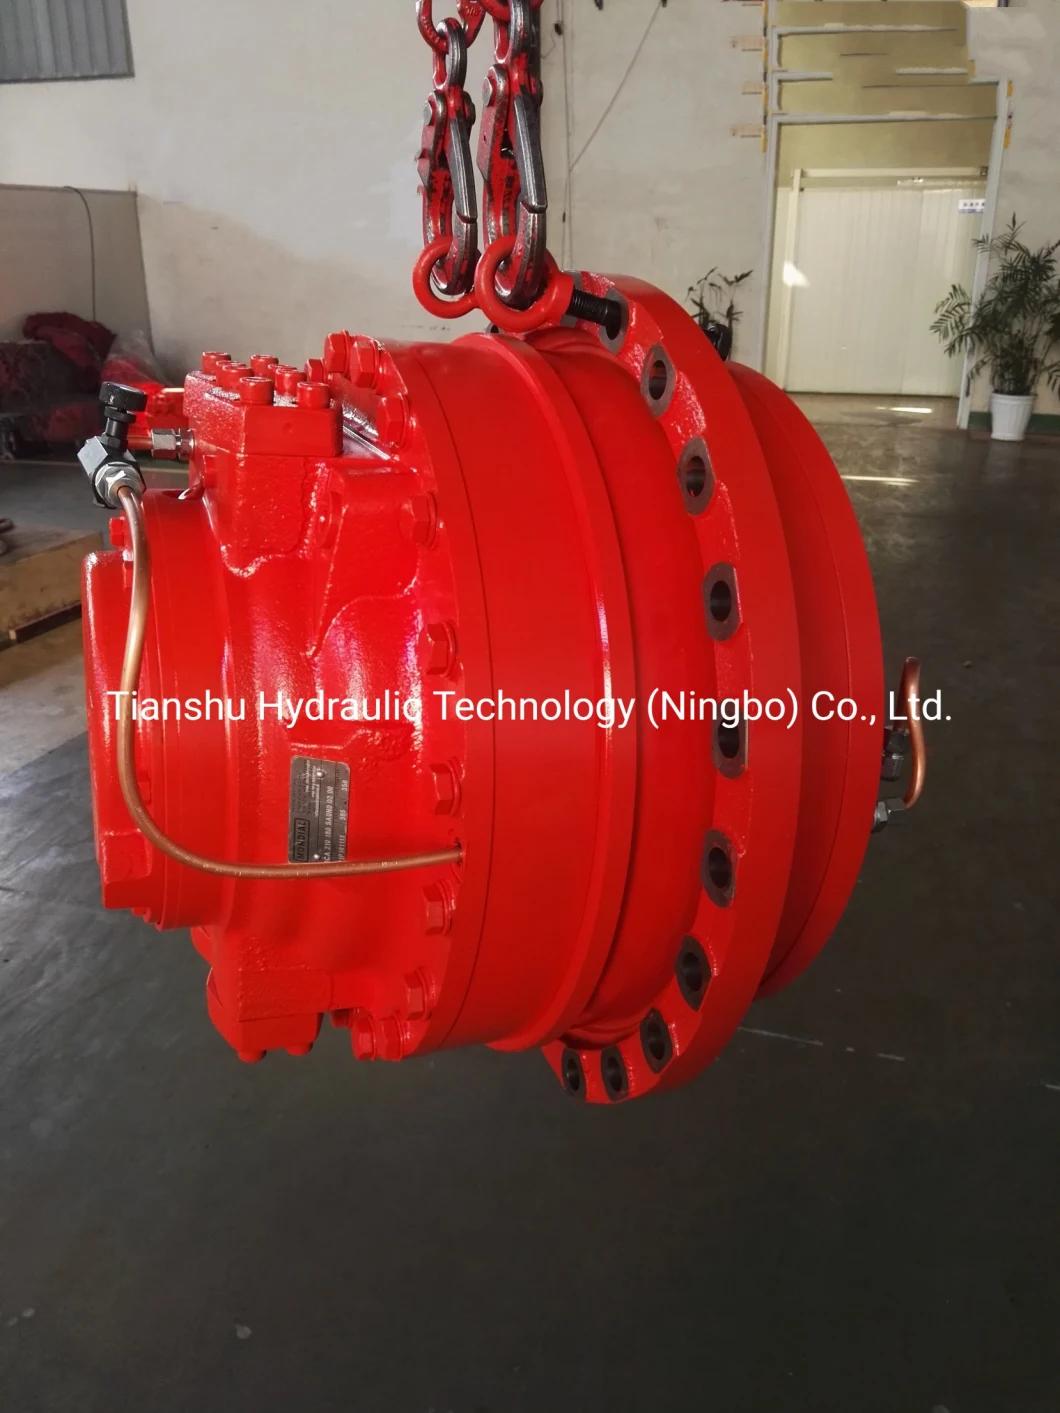 Rexroth Hydraulic Motor Radial Piston Hagglunds Ca210+Ca70 Chinese Factory OEM.